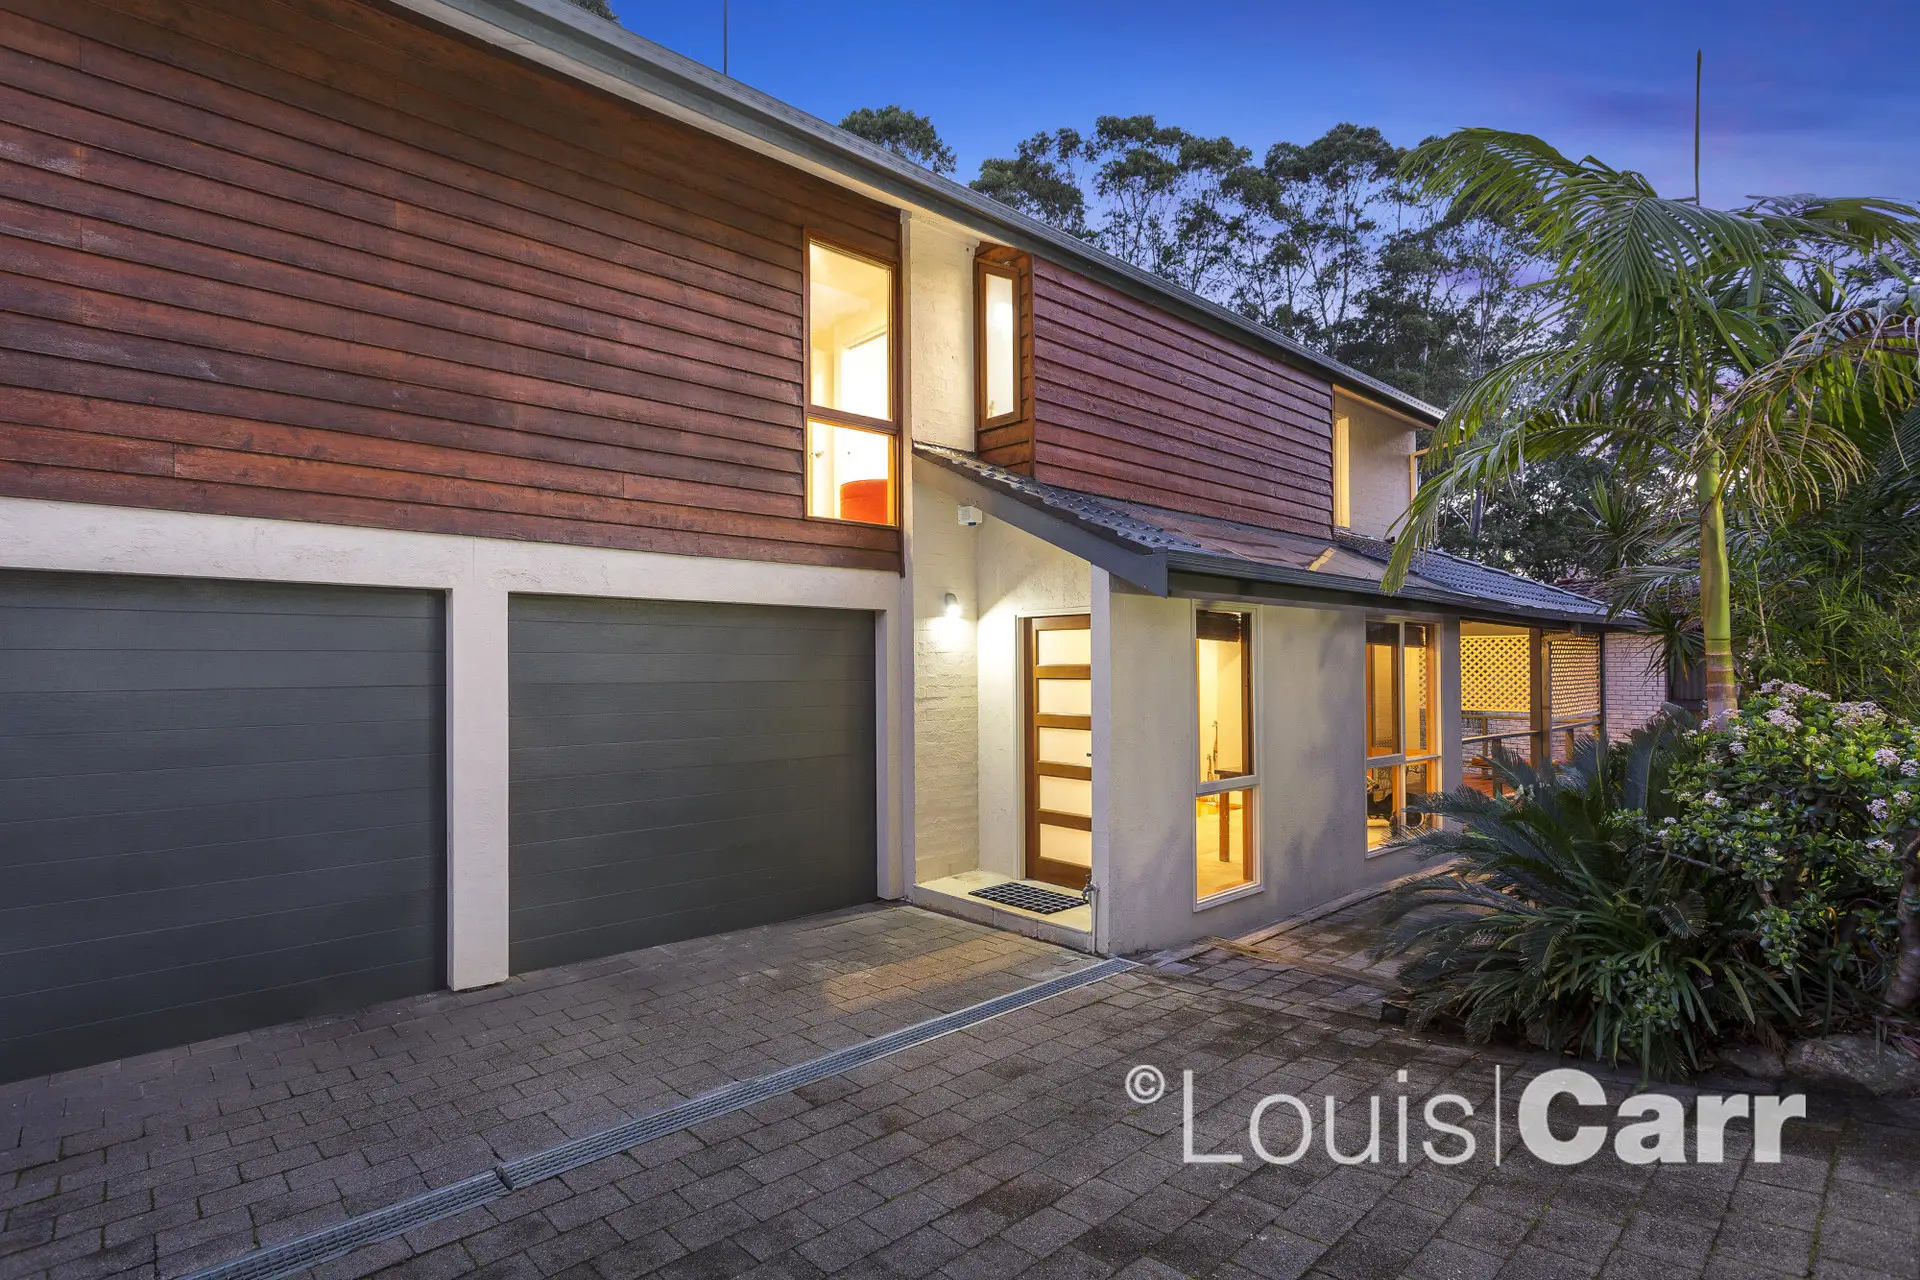 Photo #1: 98 Oratava Avenue, West Pennant Hills - Sold by Louis Carr Real Estate